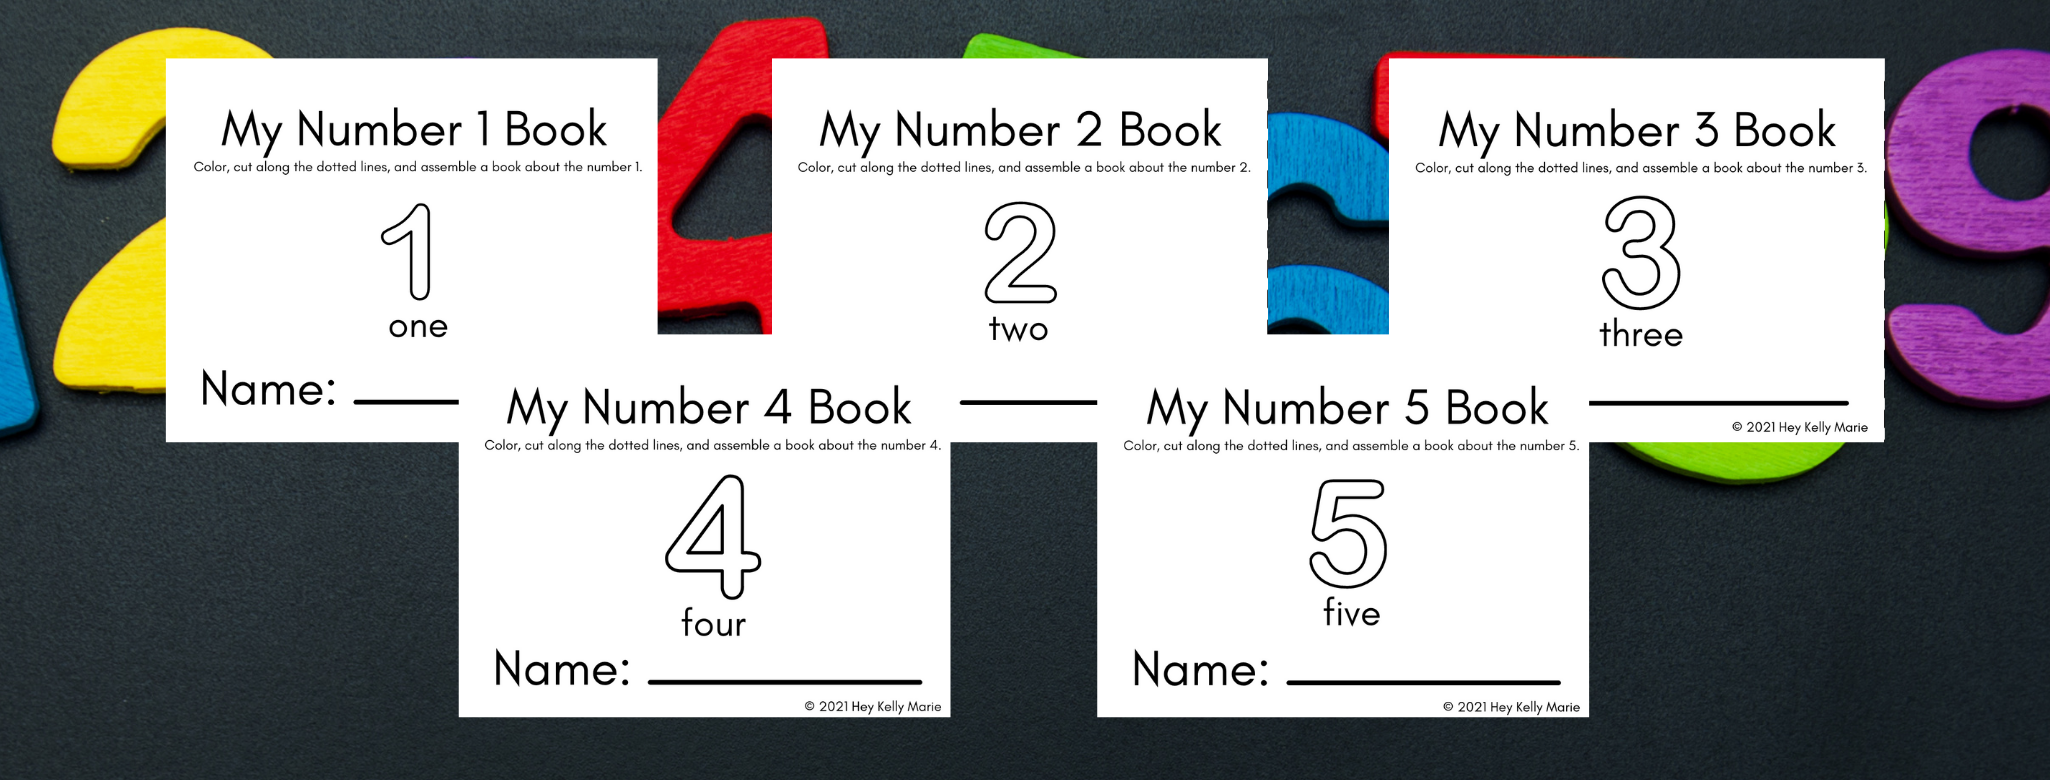 printable-number-books-for-kids-to-make-read-and-learn